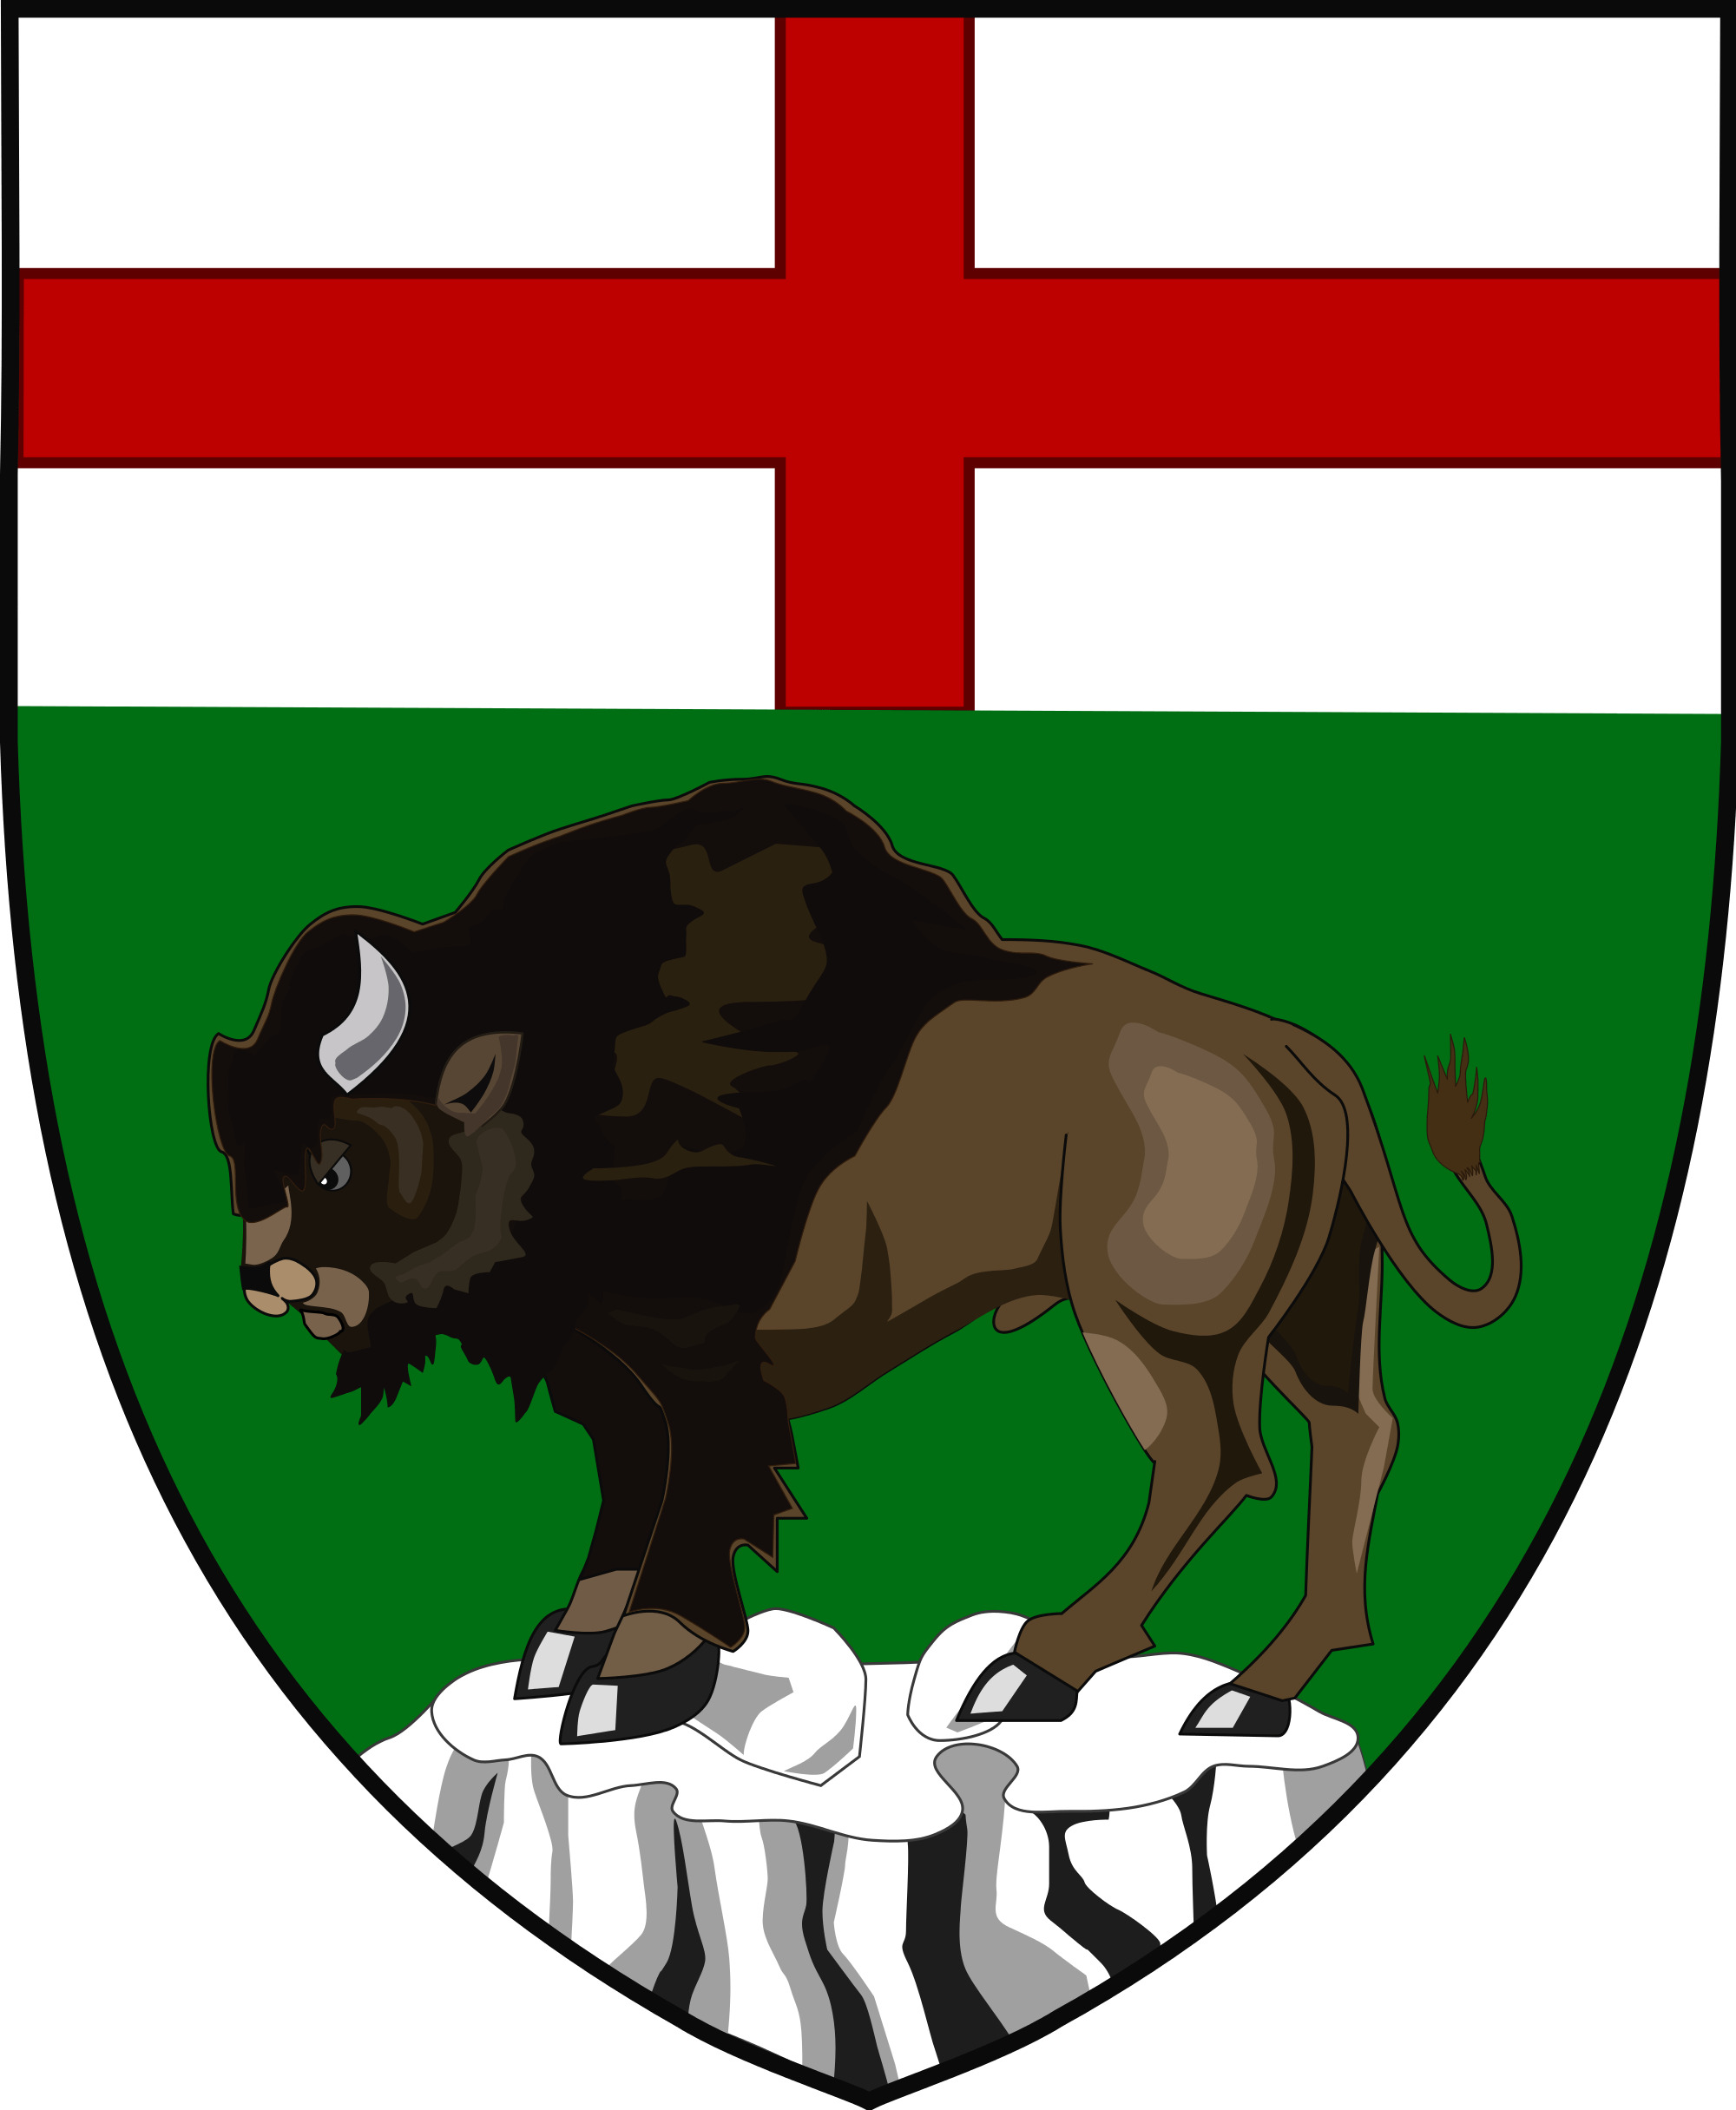 Shield Of Arms Of Manitoba icons